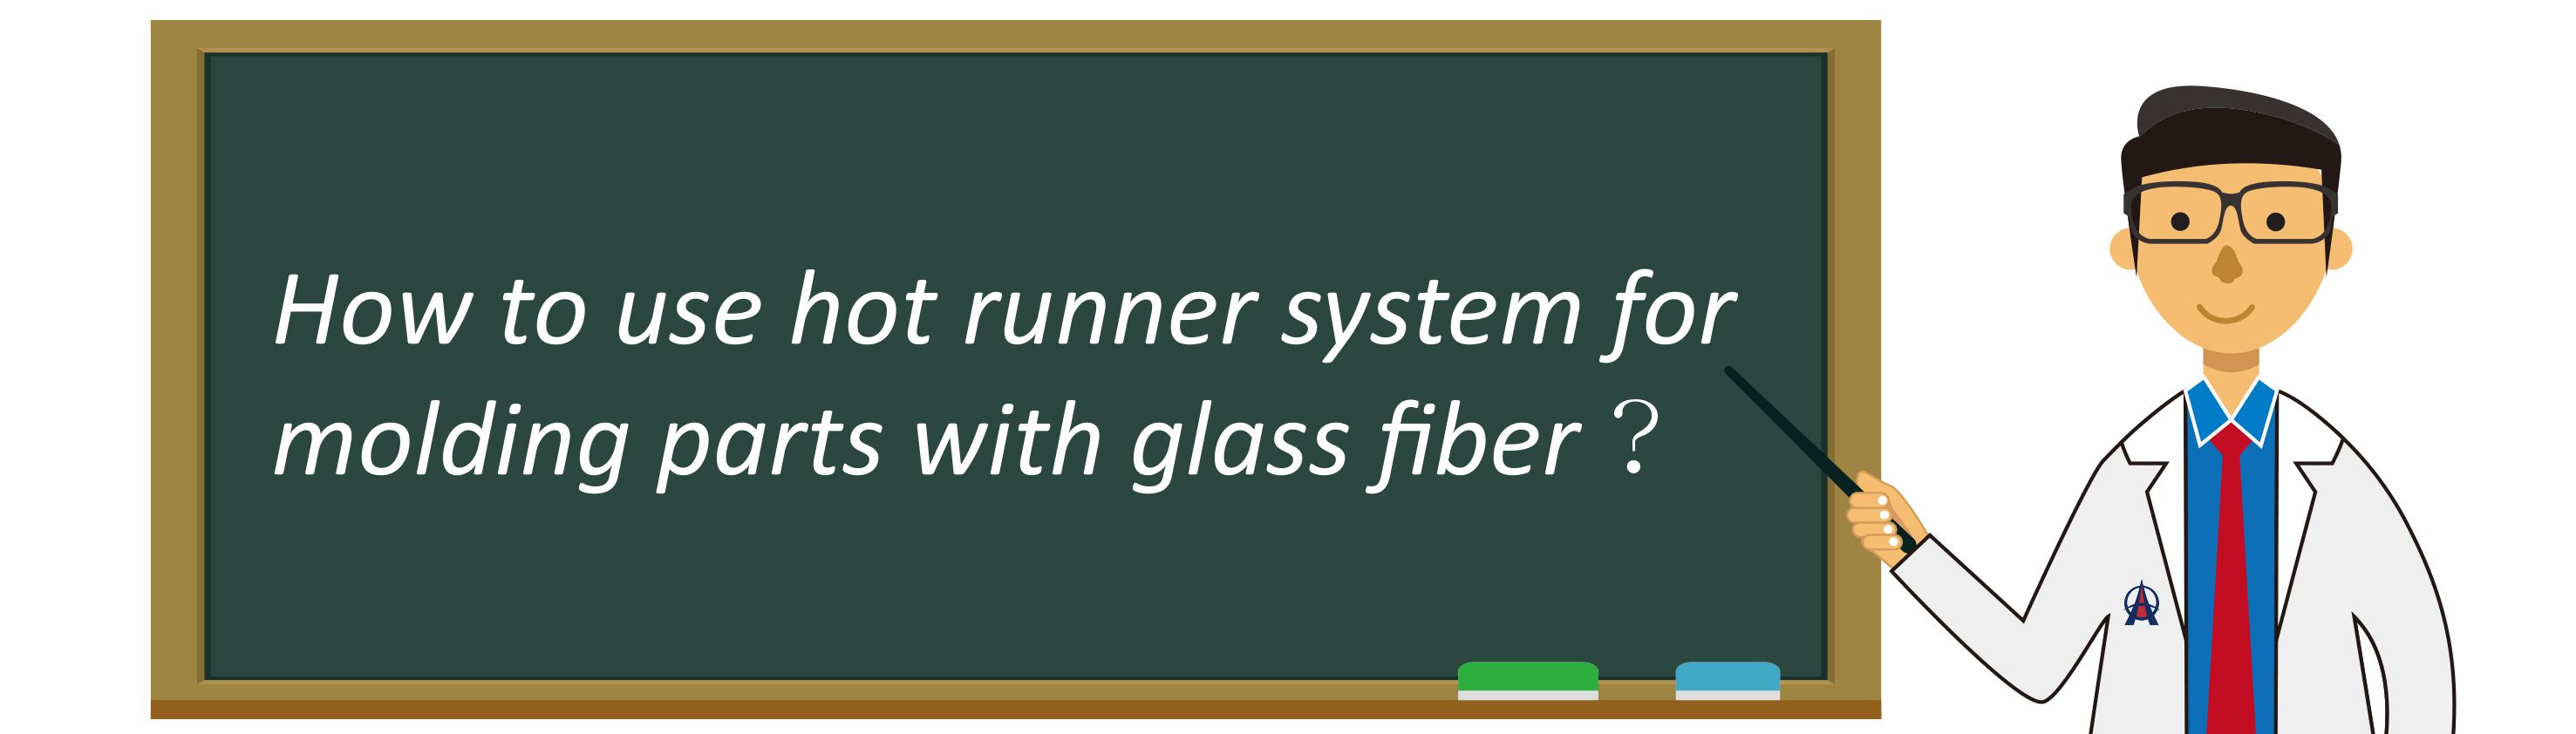 How to use hot runner system for molding parts with glass fiber